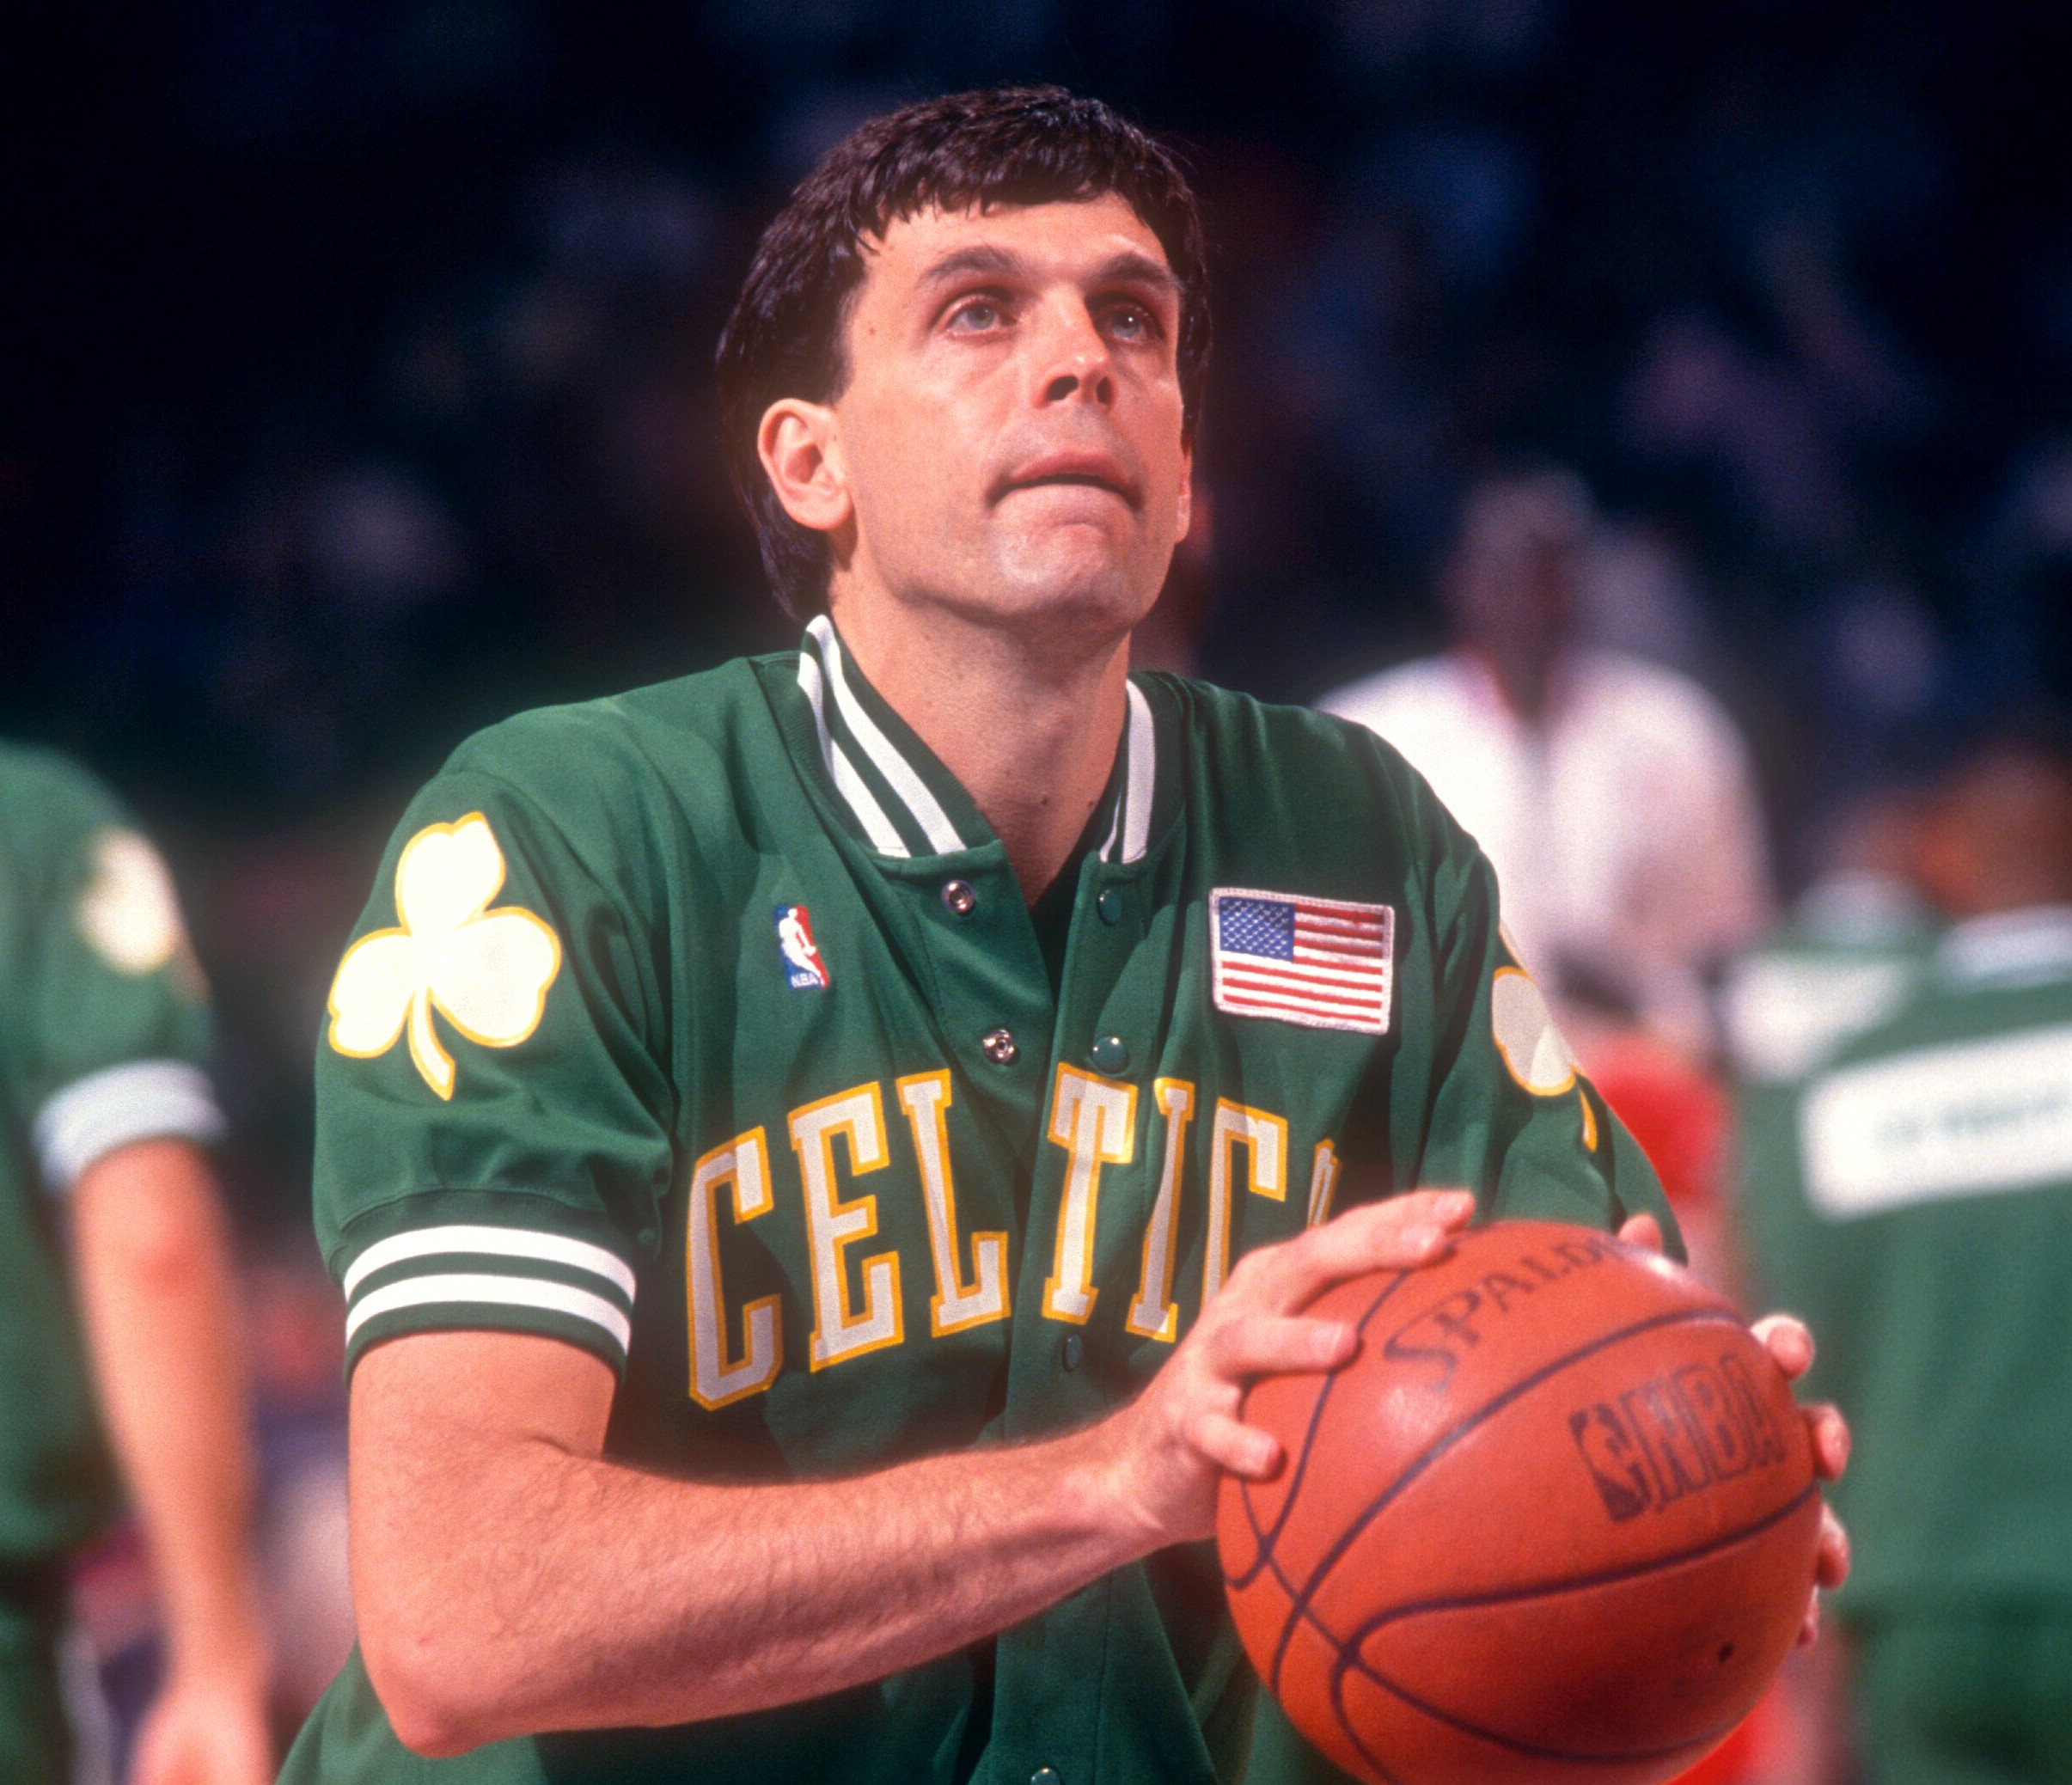 Did the Celtics Kevin McHale really have a wingspan of 8-feet?